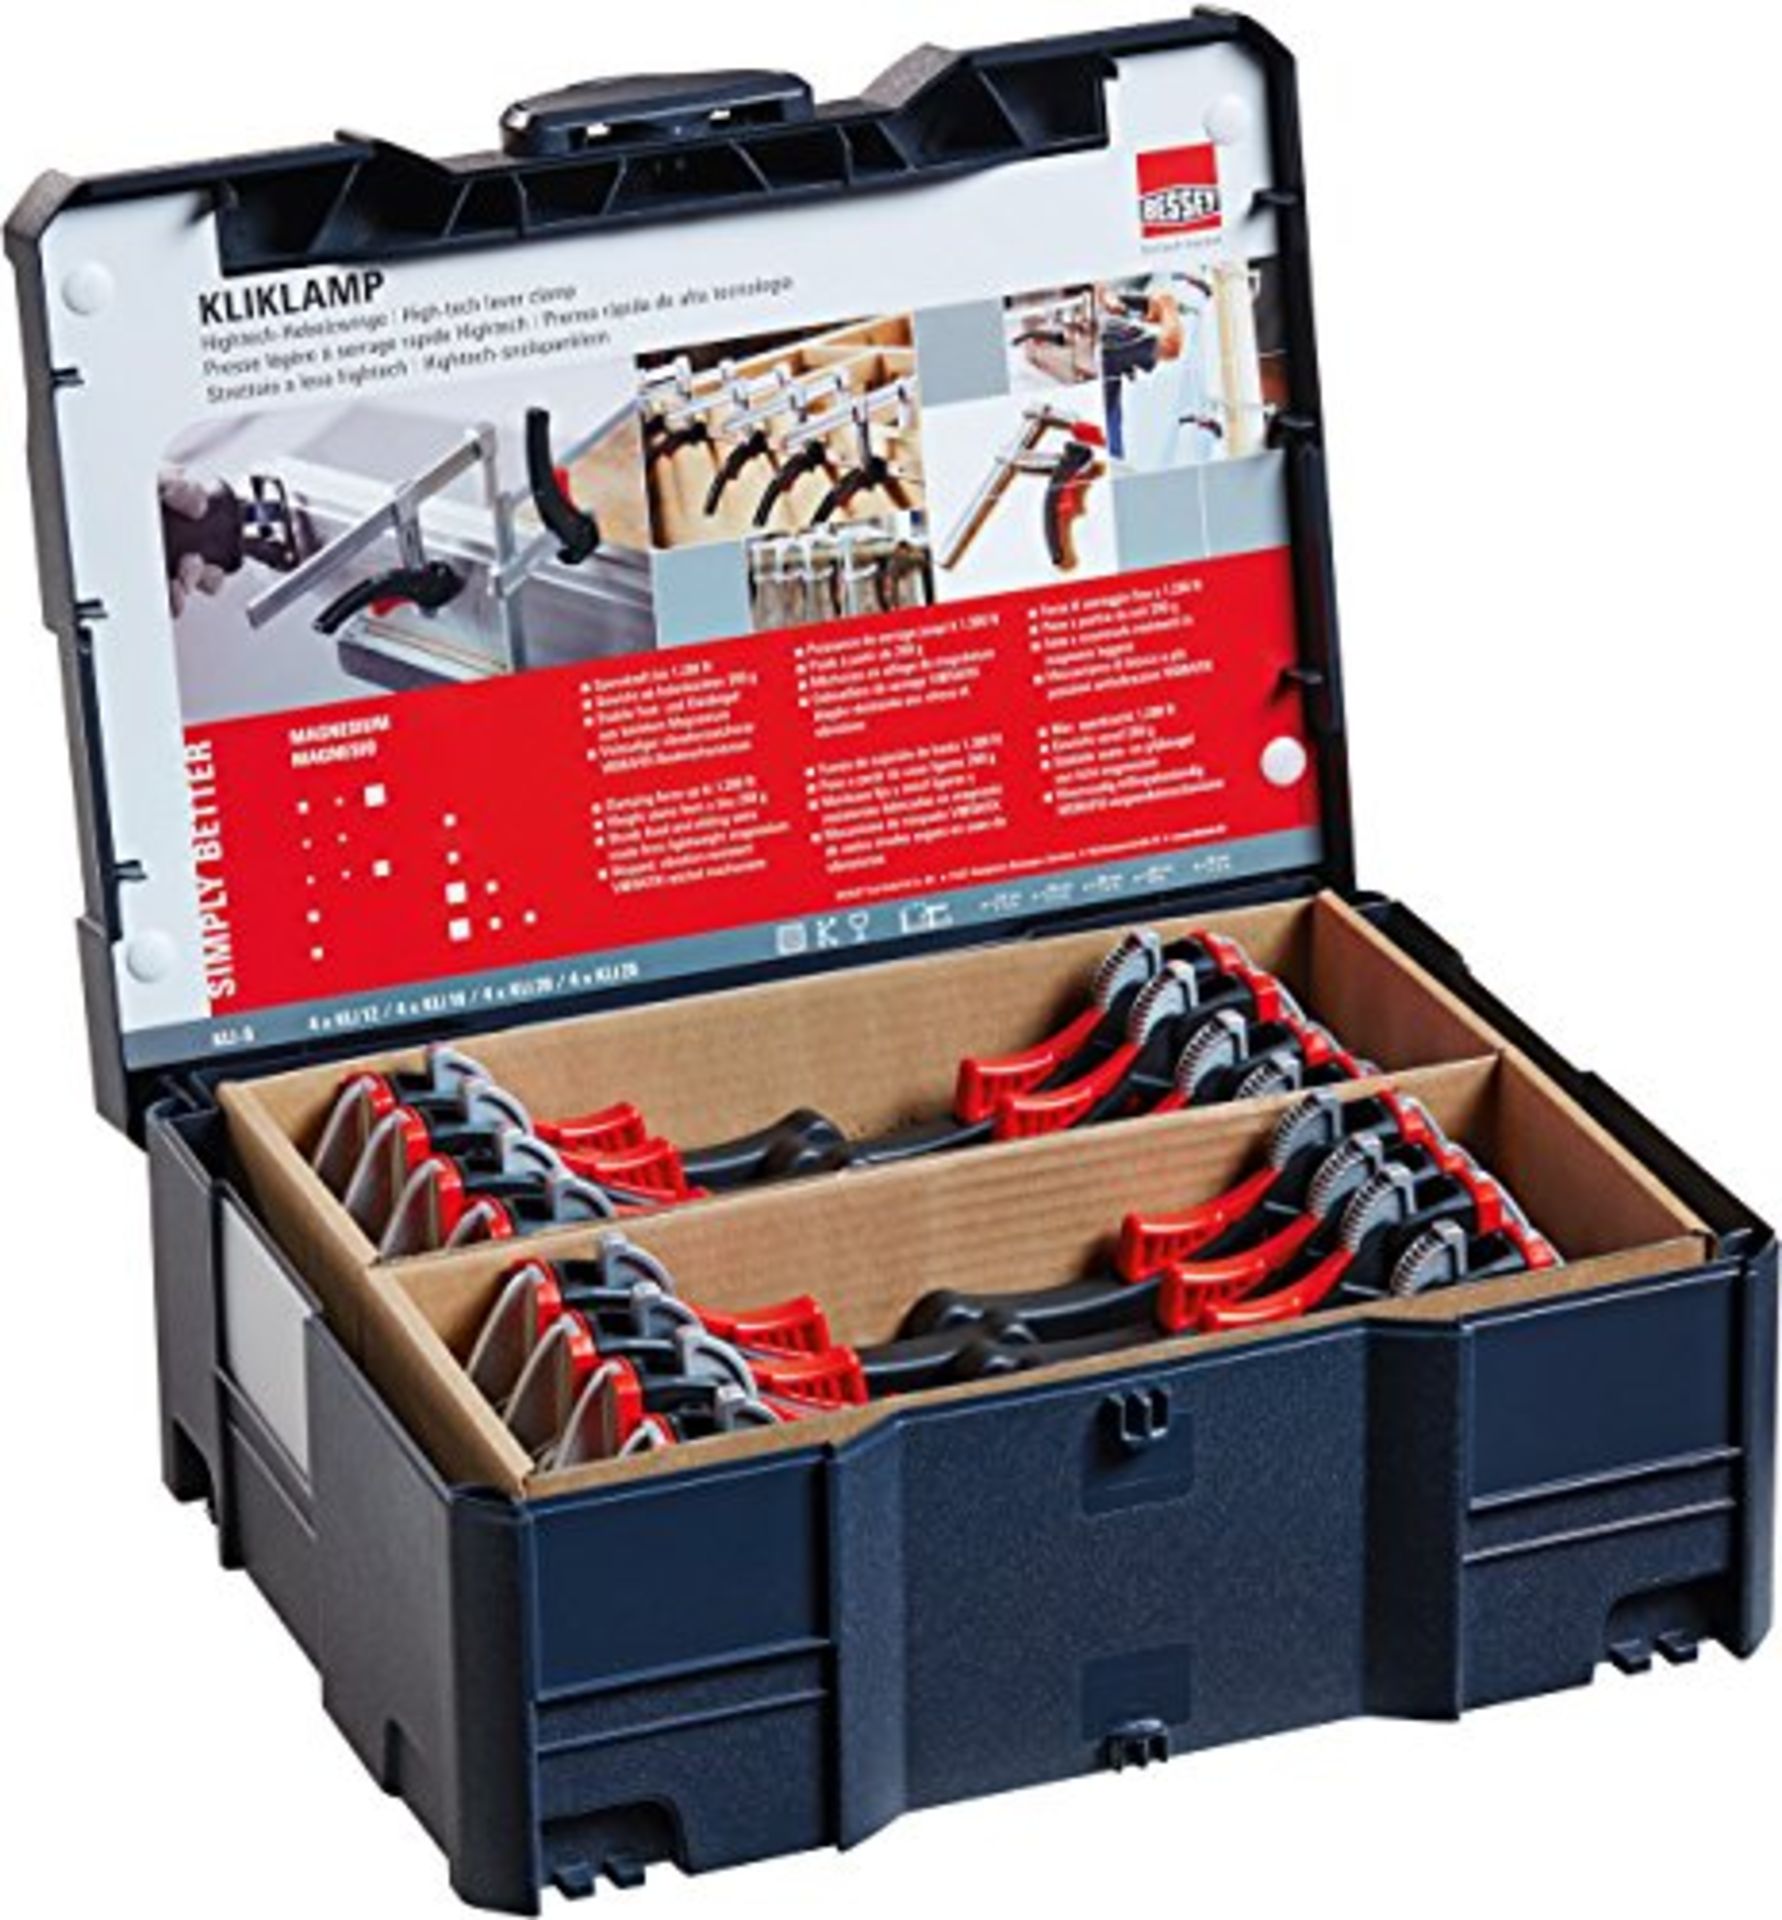 1 x Bessey KLI-S Kliklamp Systainer Set with 16 Clamps, Silver, teilig | EAN: 4008158027296 | RRP £3